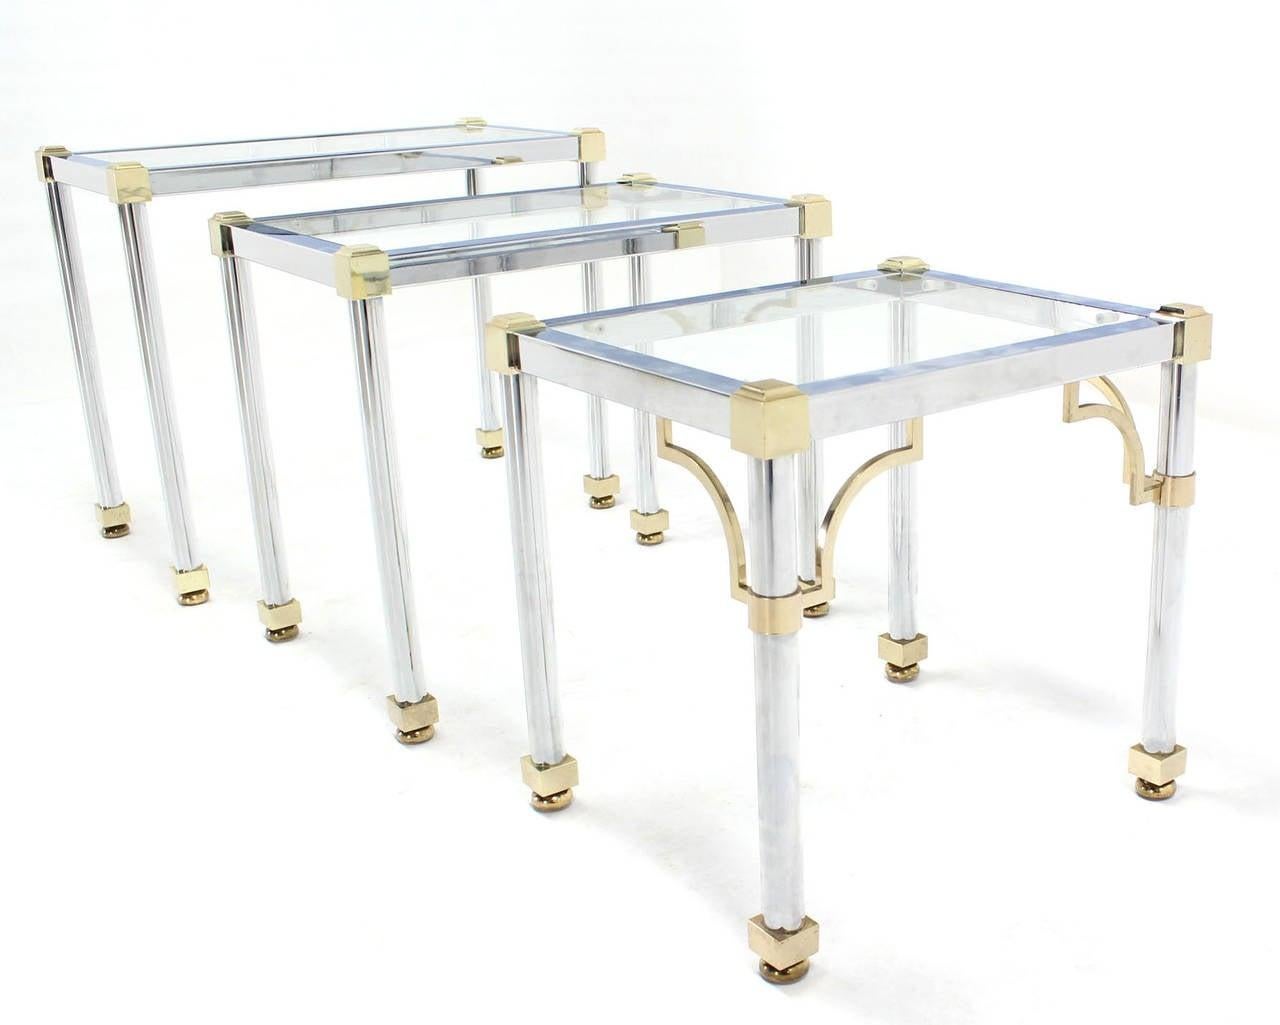 Set of 3  Chrome and Brass Metal Glass Top Nesting Side End Occasional Tables 
Table 1 = 21” h 25” 1/4” w X 15”d, Table 2 = 19” x 21 3/4” 15”, Table 3 = 17 3/4” x 18 1/4” x15” less